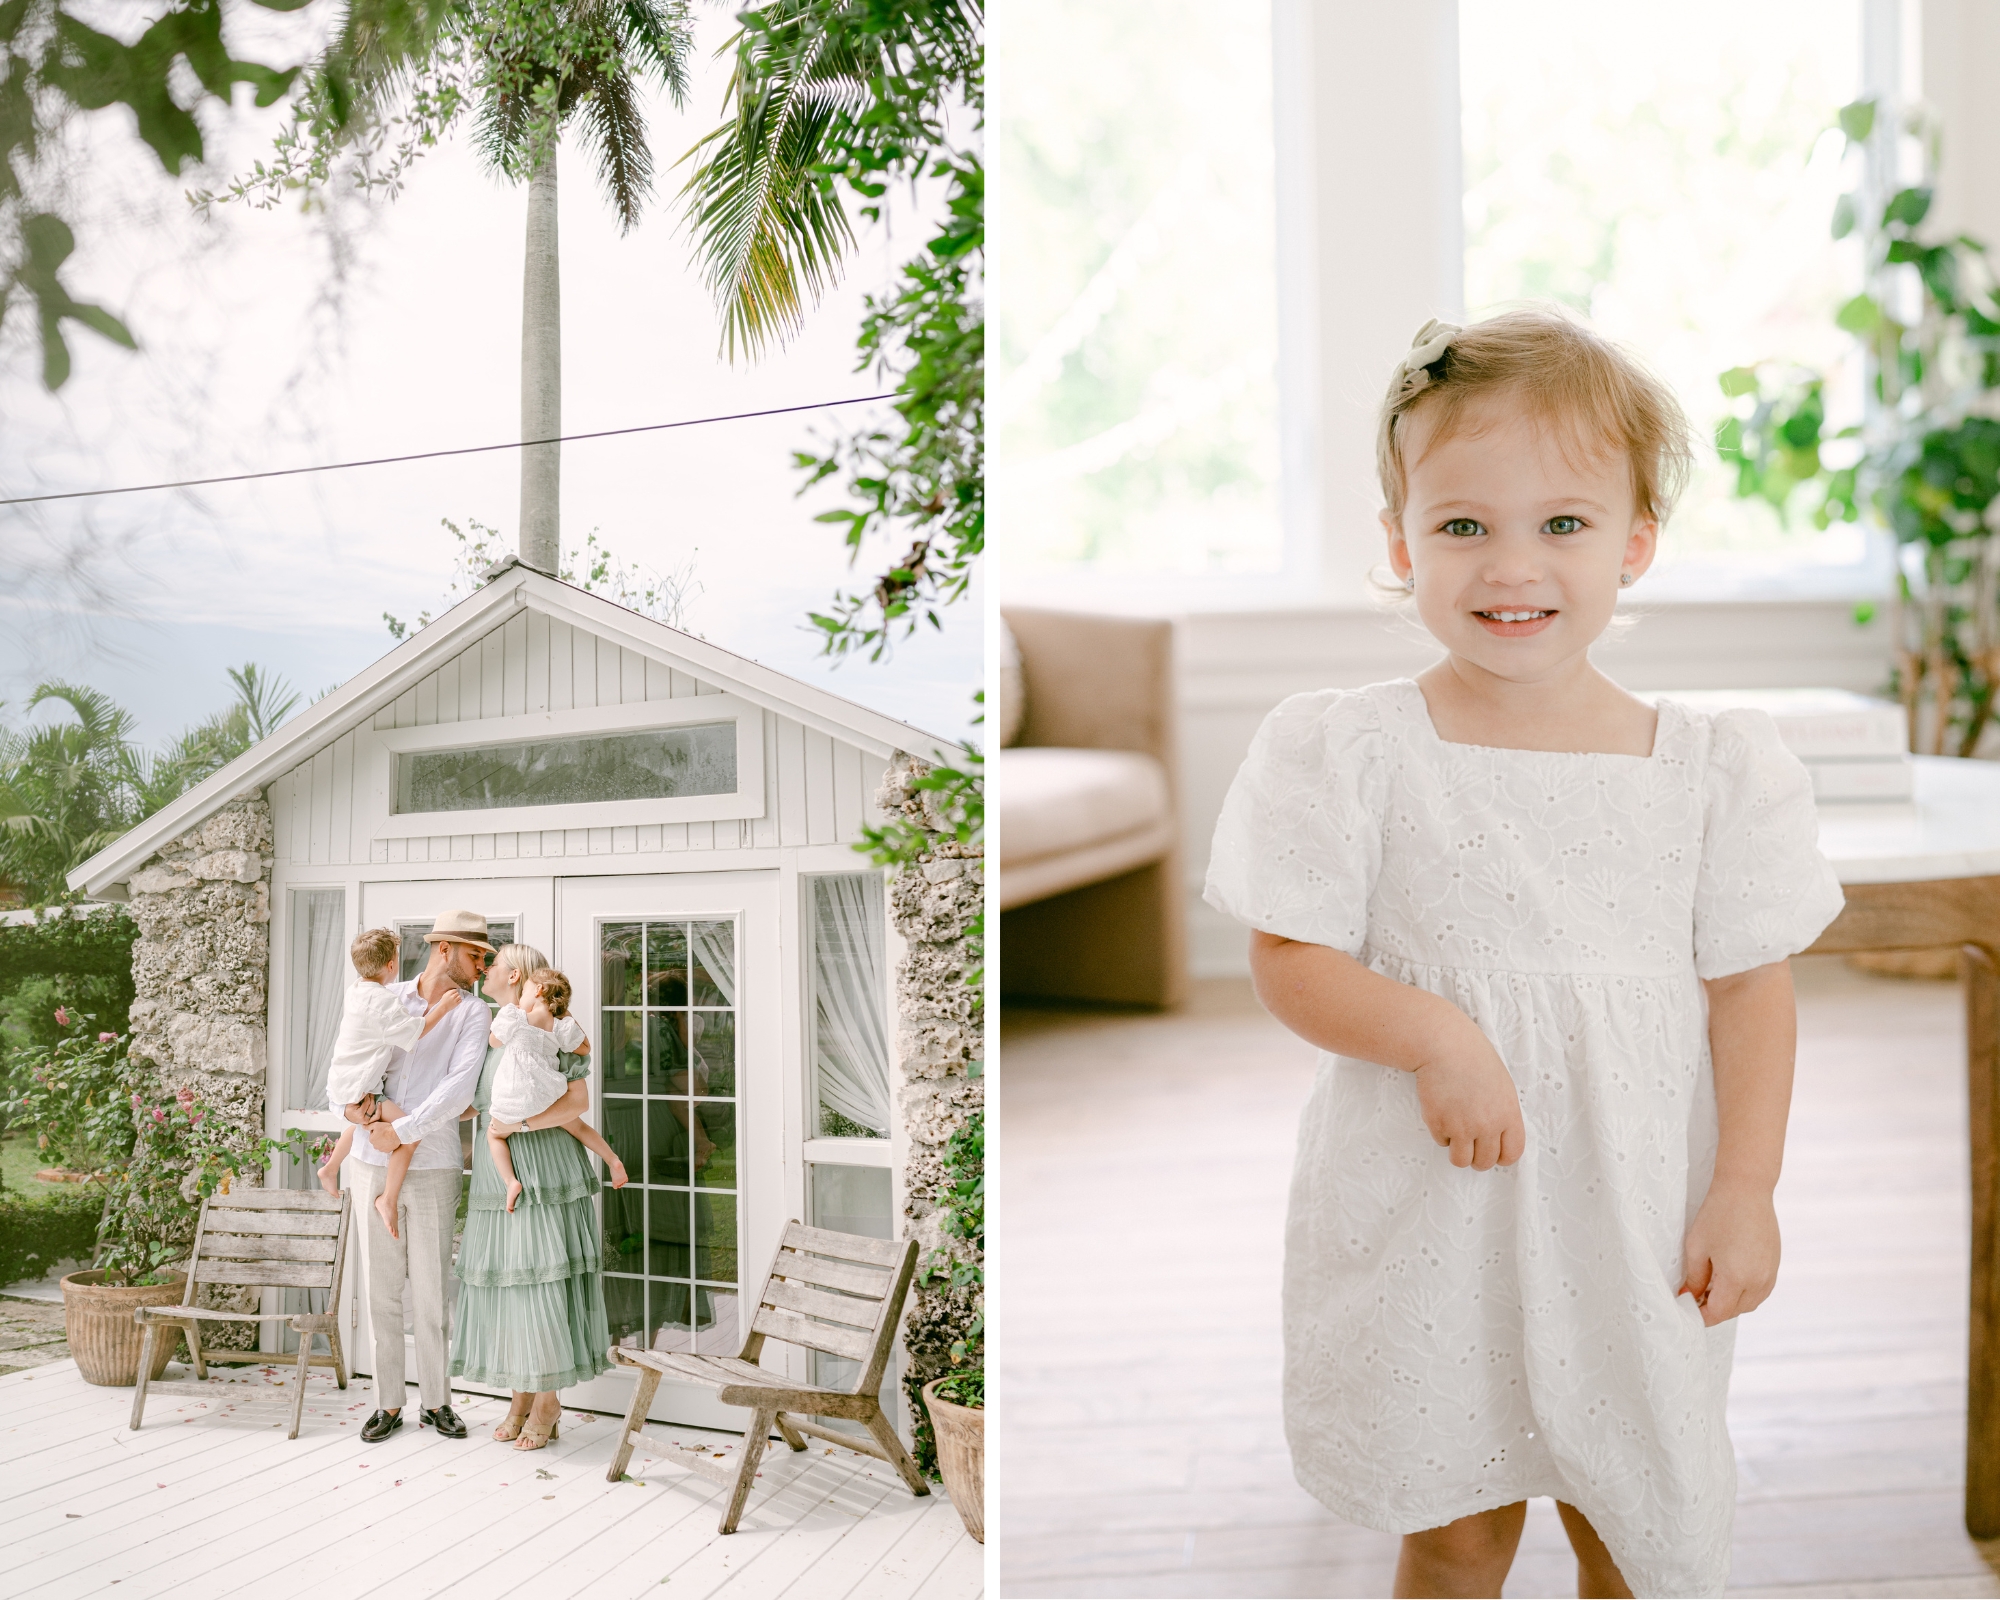 Miami Moms: Celebrate Motherhood with Mother's Day Photoshoot